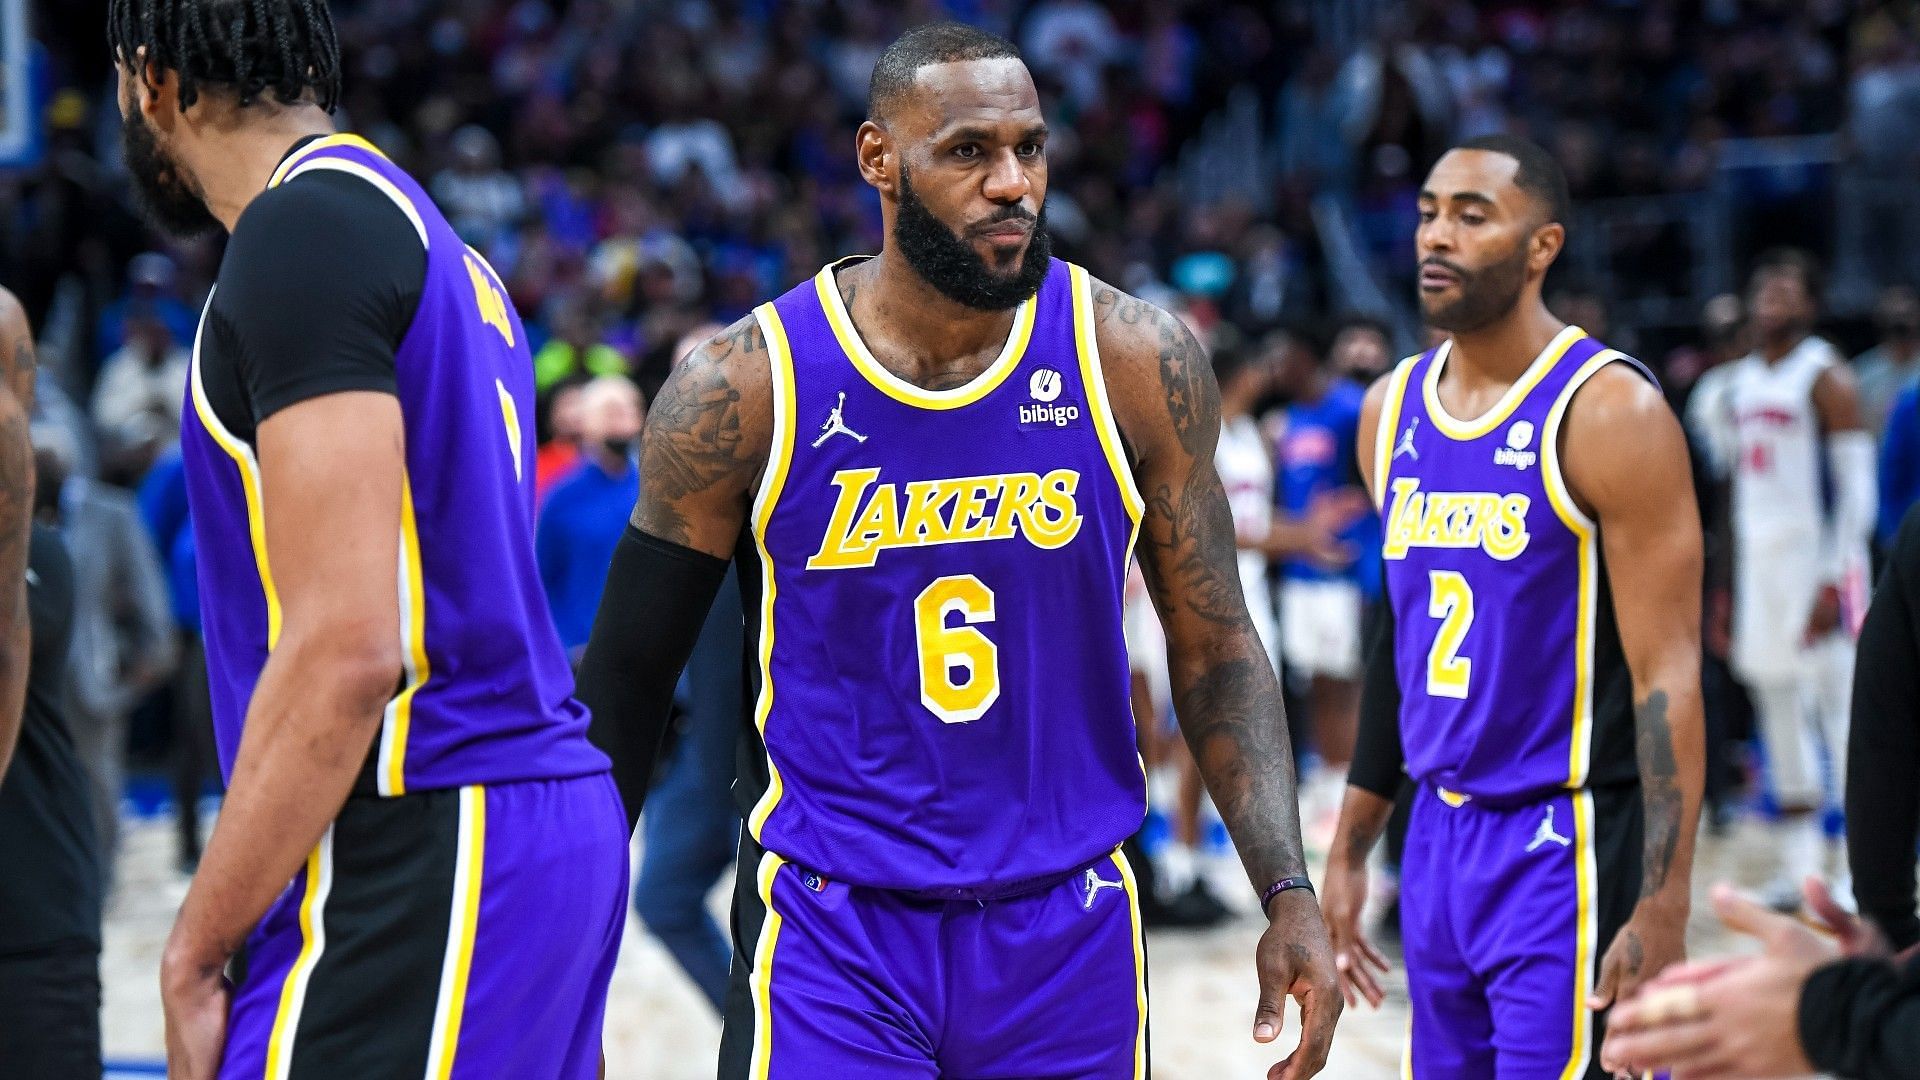 The LA Lakers have several names on the injury list heading into their game against the Dallas Mavericks. [Photo: Sporting News]